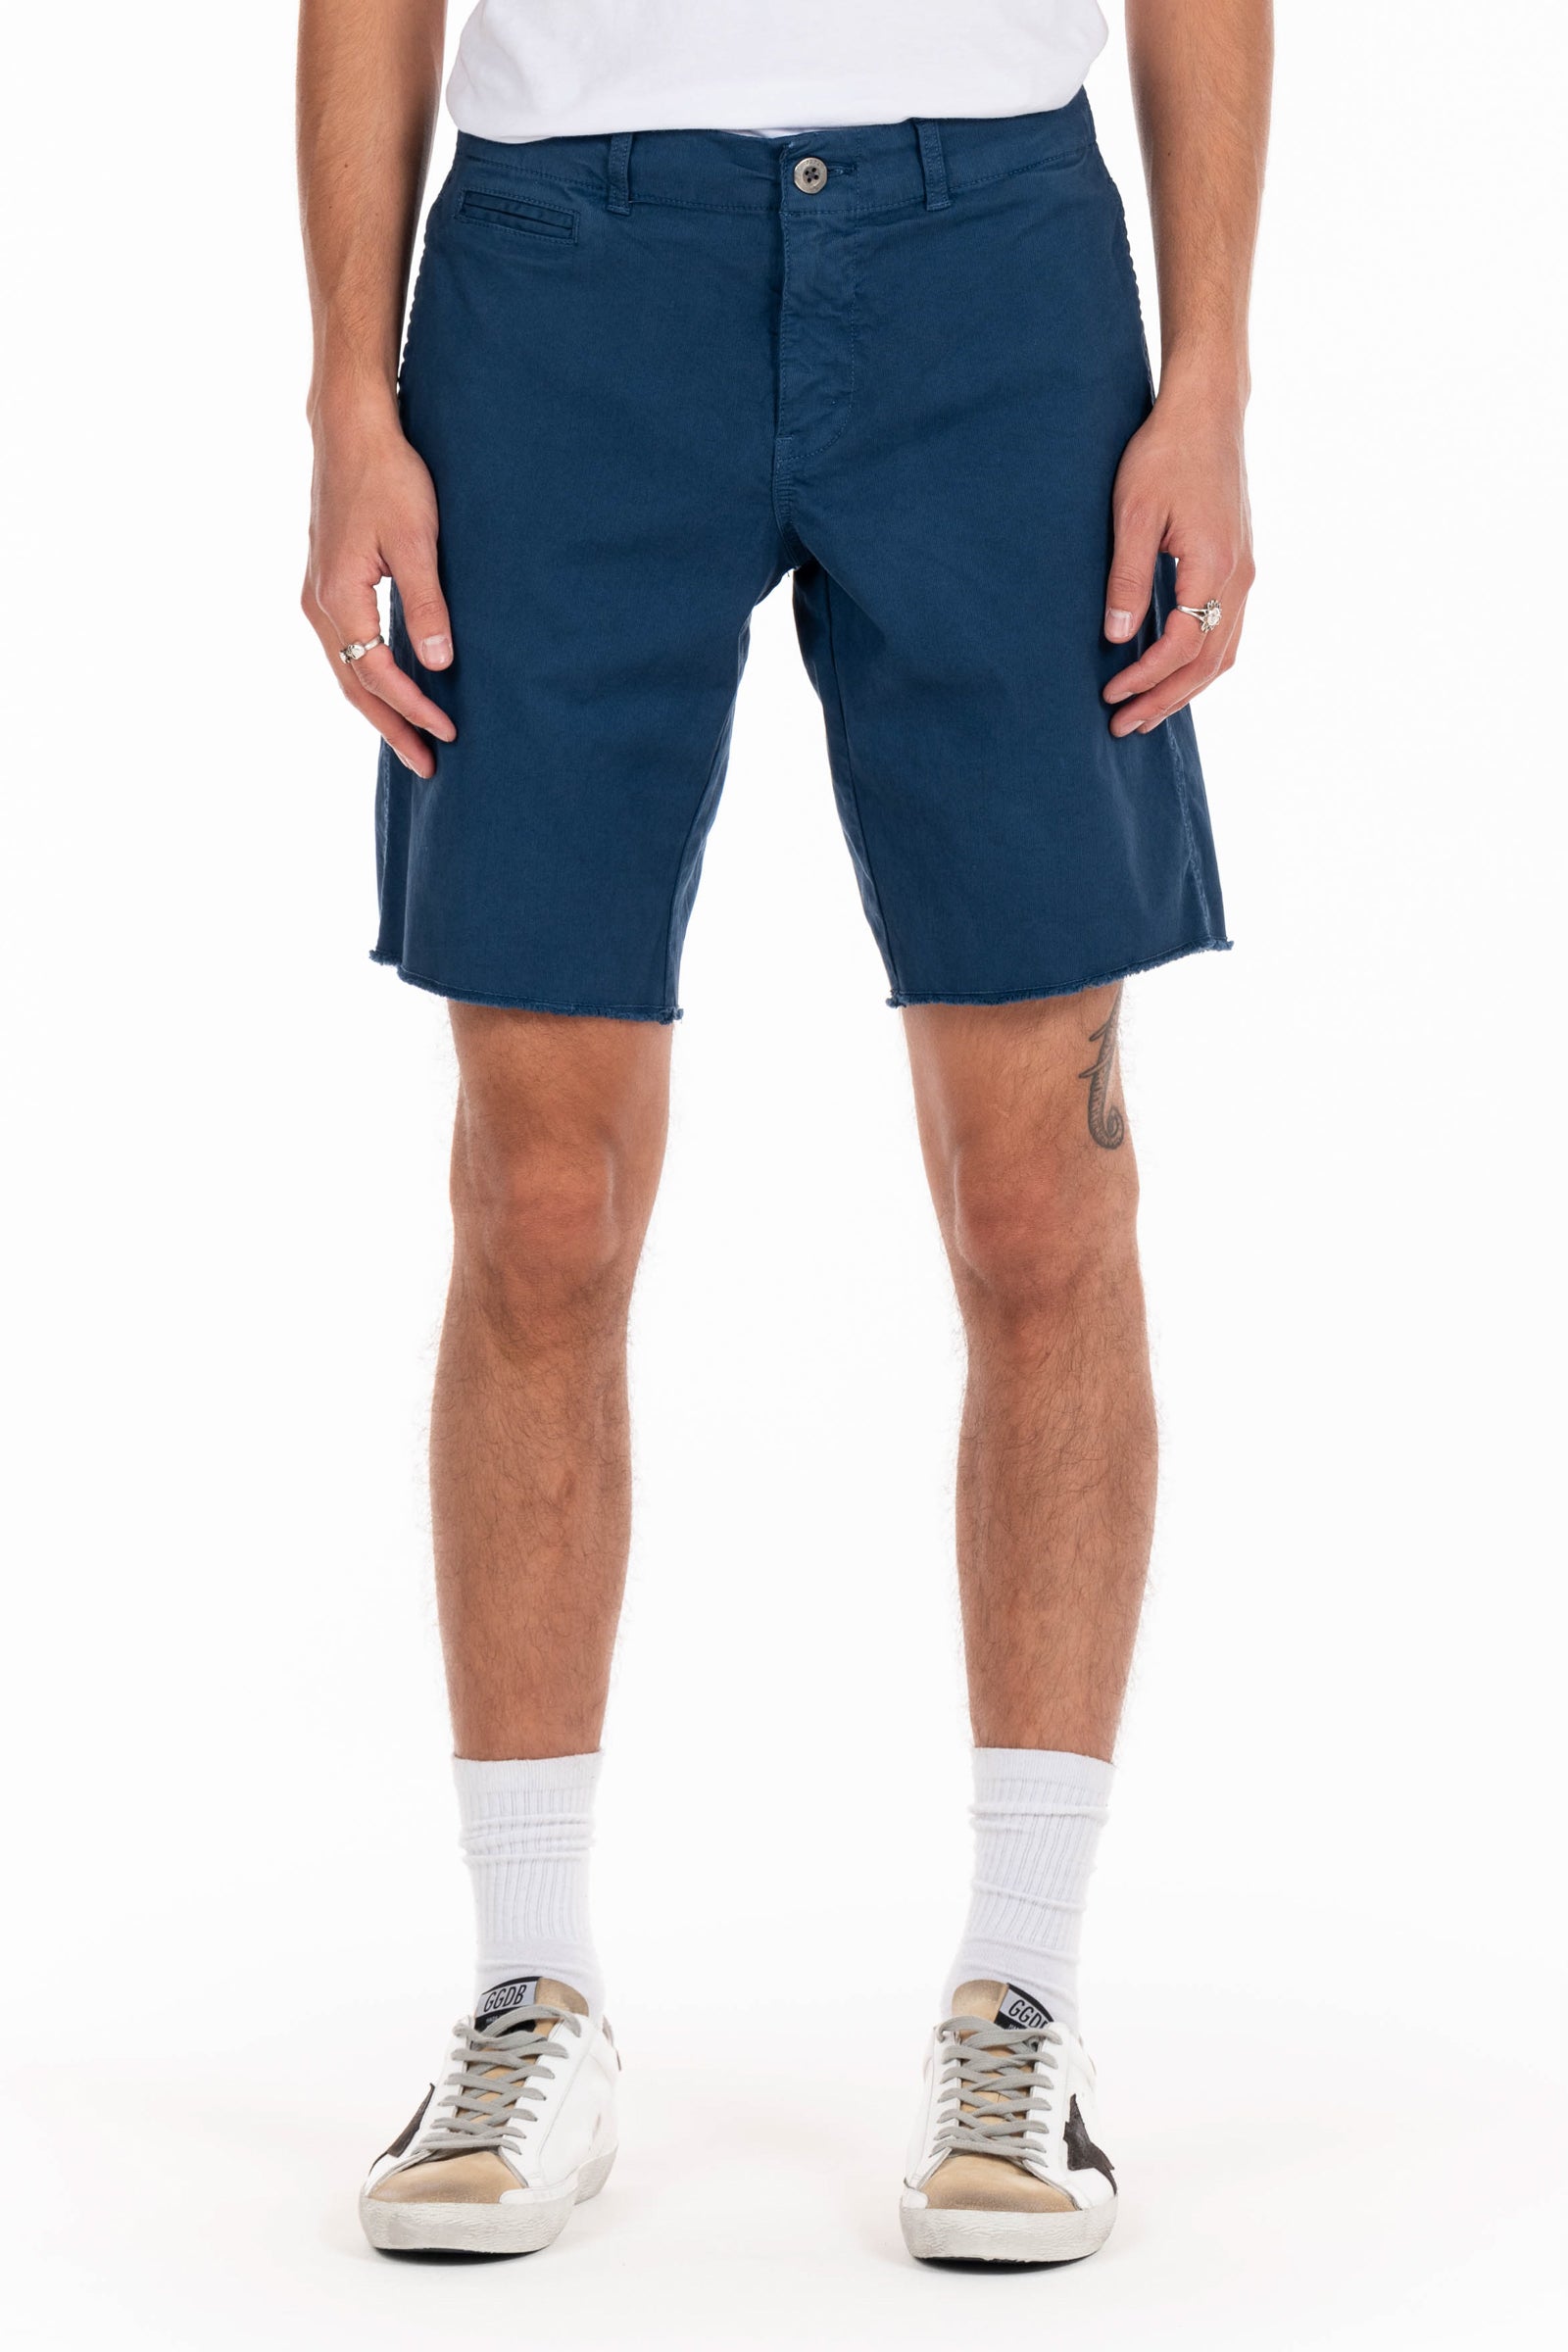 Original Paperbacks Rockland Chino Short in Ocean on Model Cropped Front View